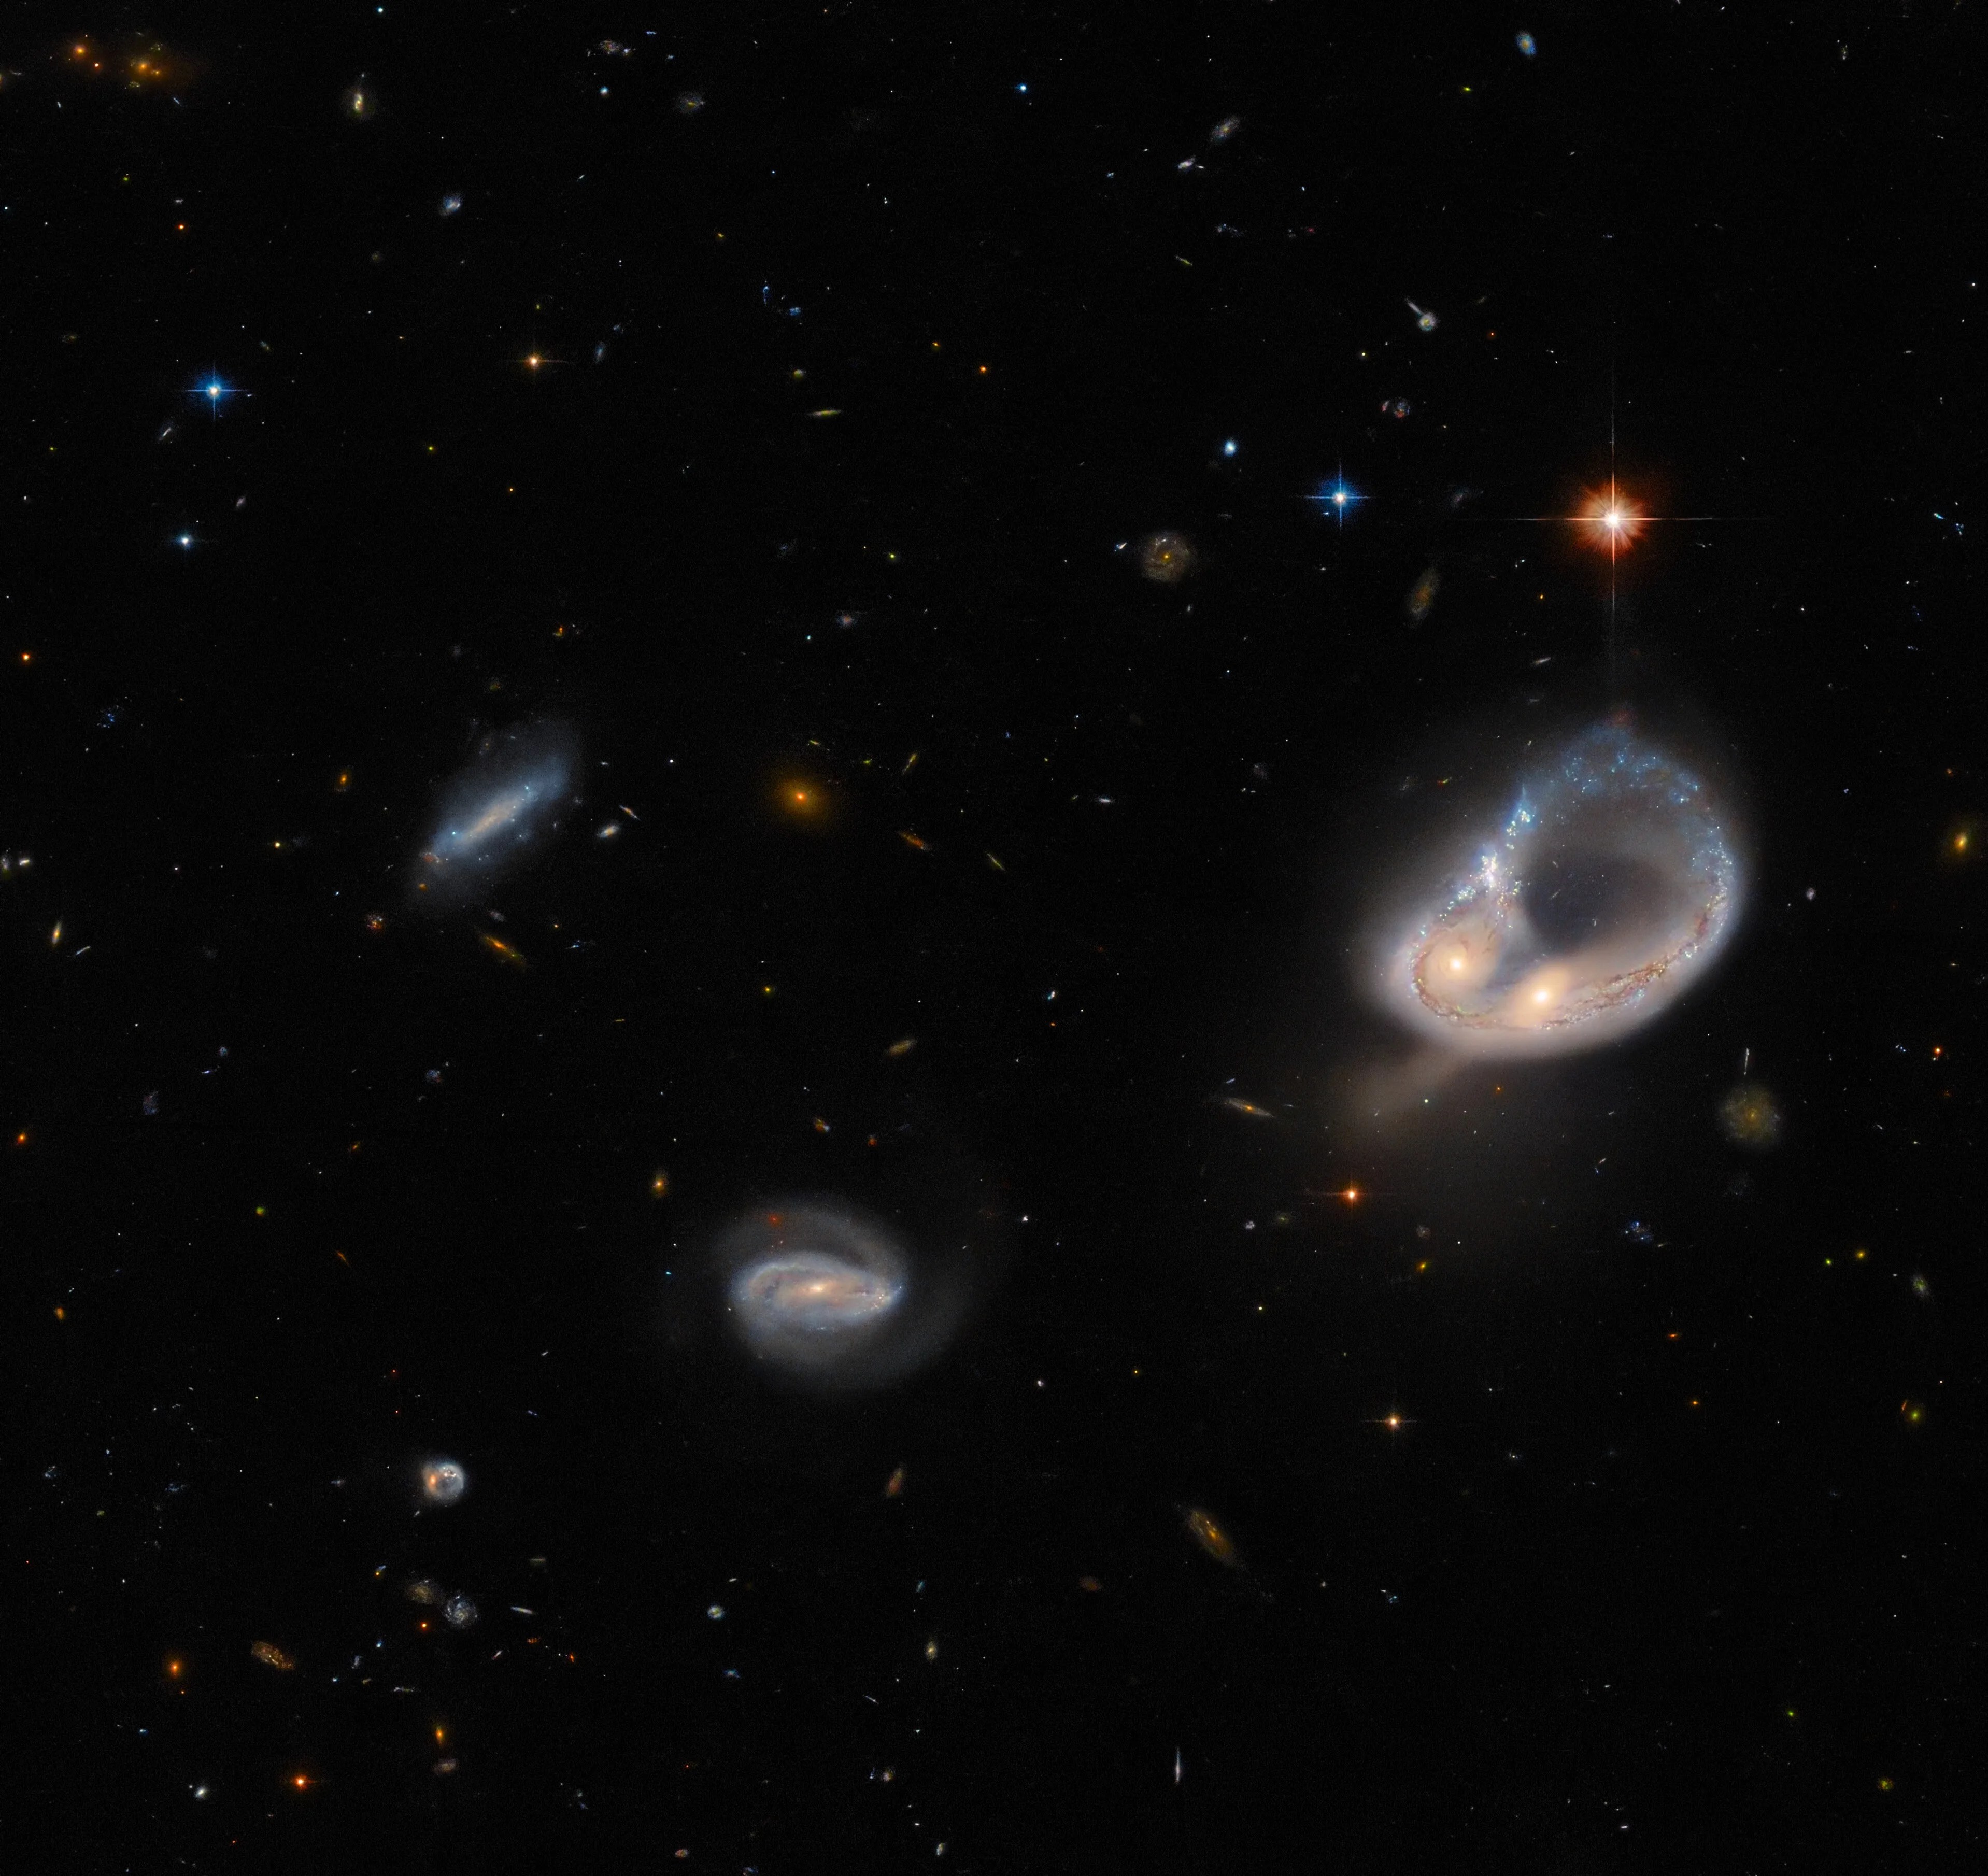 2 galaxies right of center form a narrow, blue ring. the cores of the 2 galaxies form a bulge on the ring’s side. bright, orange star lies above the ring. 2 smaller spiral galaxies left of center. black background speckled with small stars and galaxies.